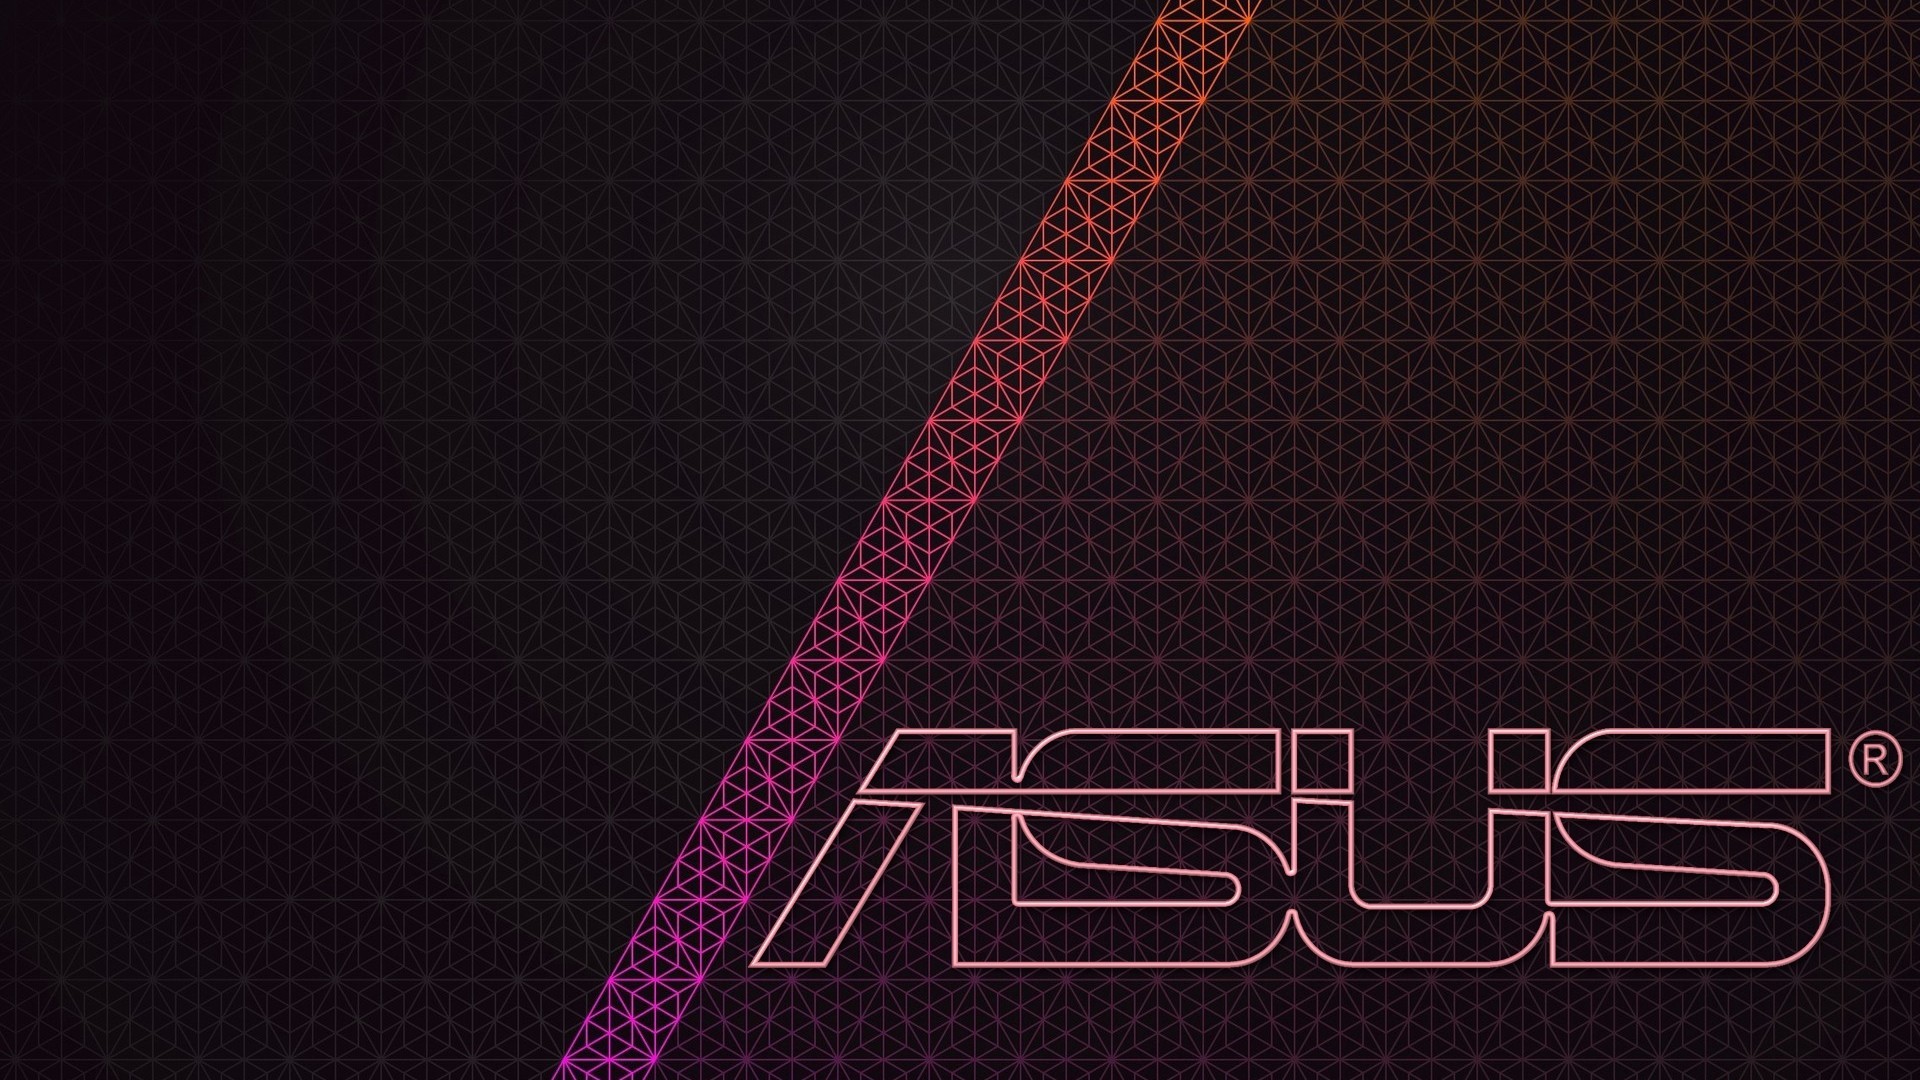 Asus, Logo, Gaming Pc, Abstract, Computer Components - Graphic Design - HD Wallpaper 